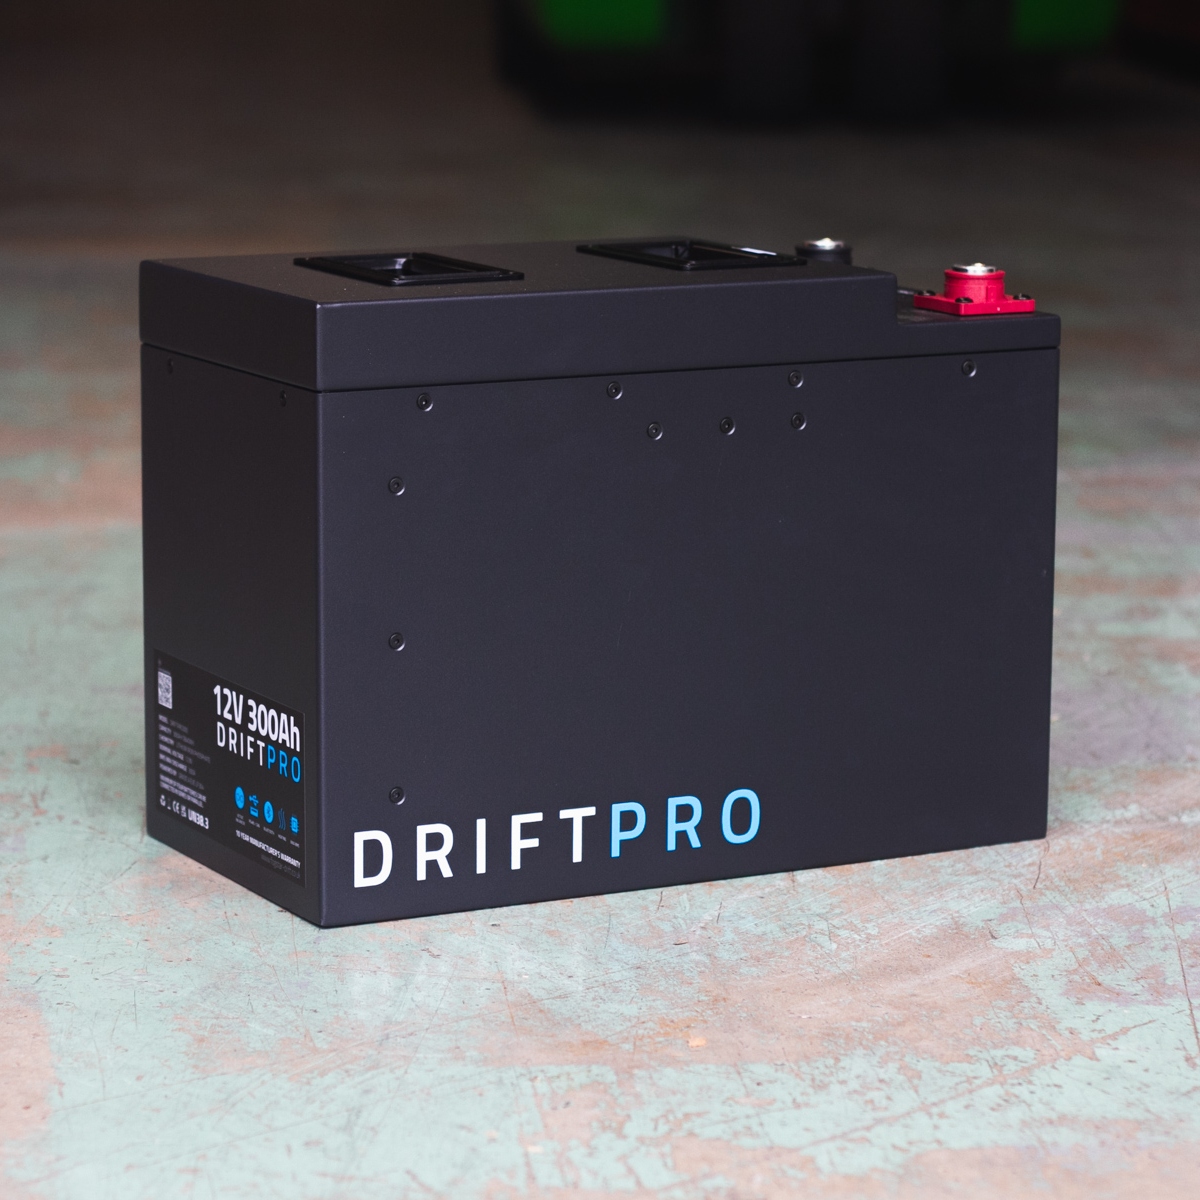 A black Fogstar Drift PRO 300Ah - 12V lithium leisure battery with specifications "12V 300Ah" rests on a concrete floor.